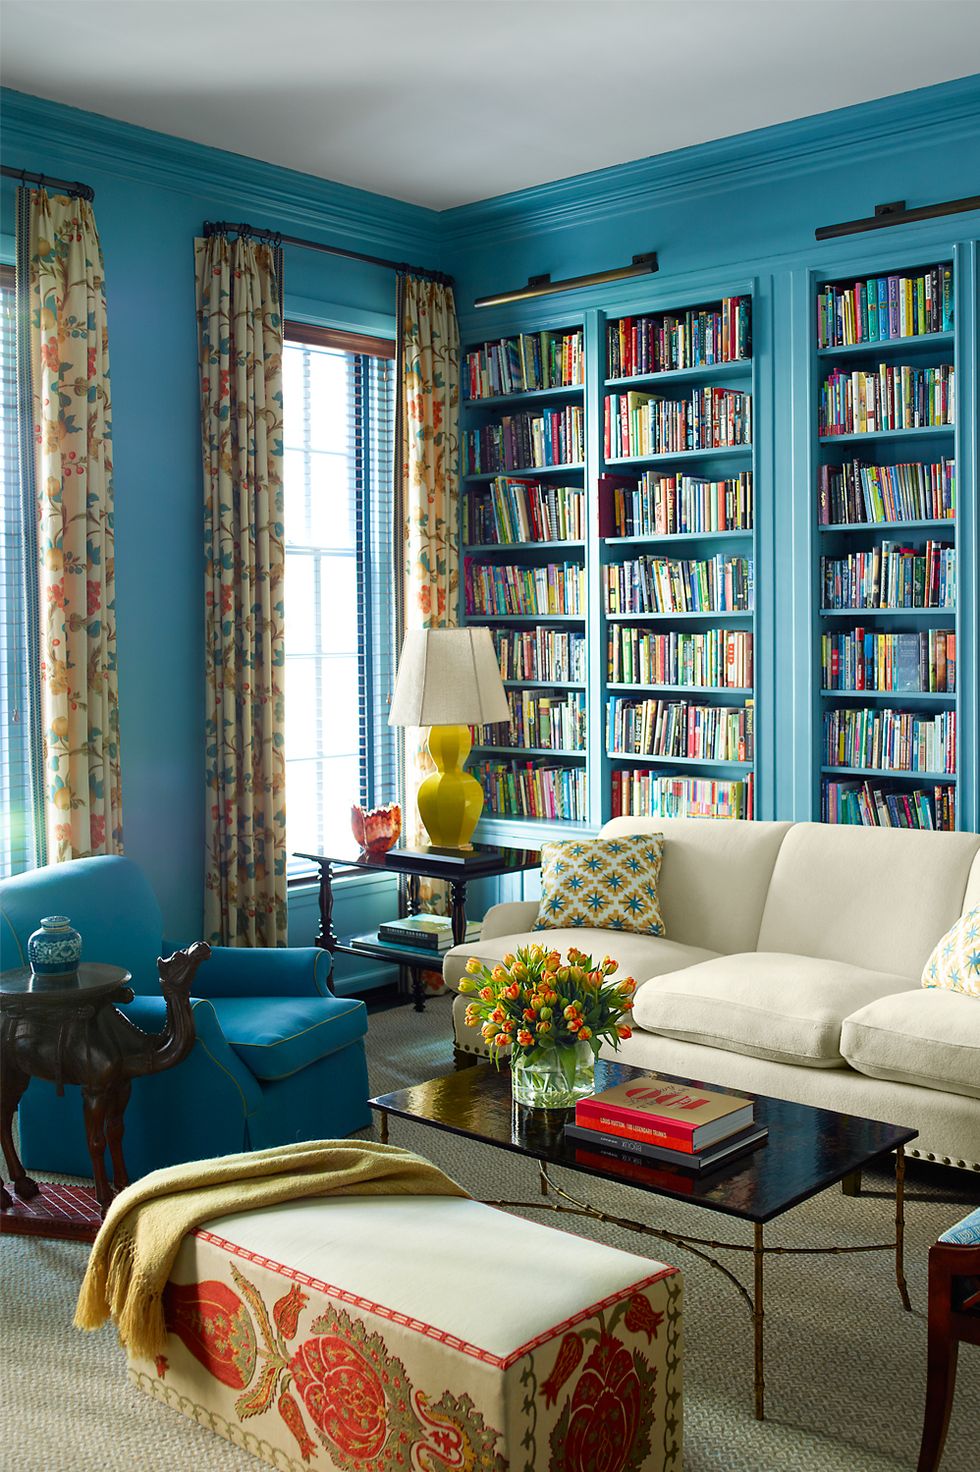 50 Blue Room Decorating Ideas How To